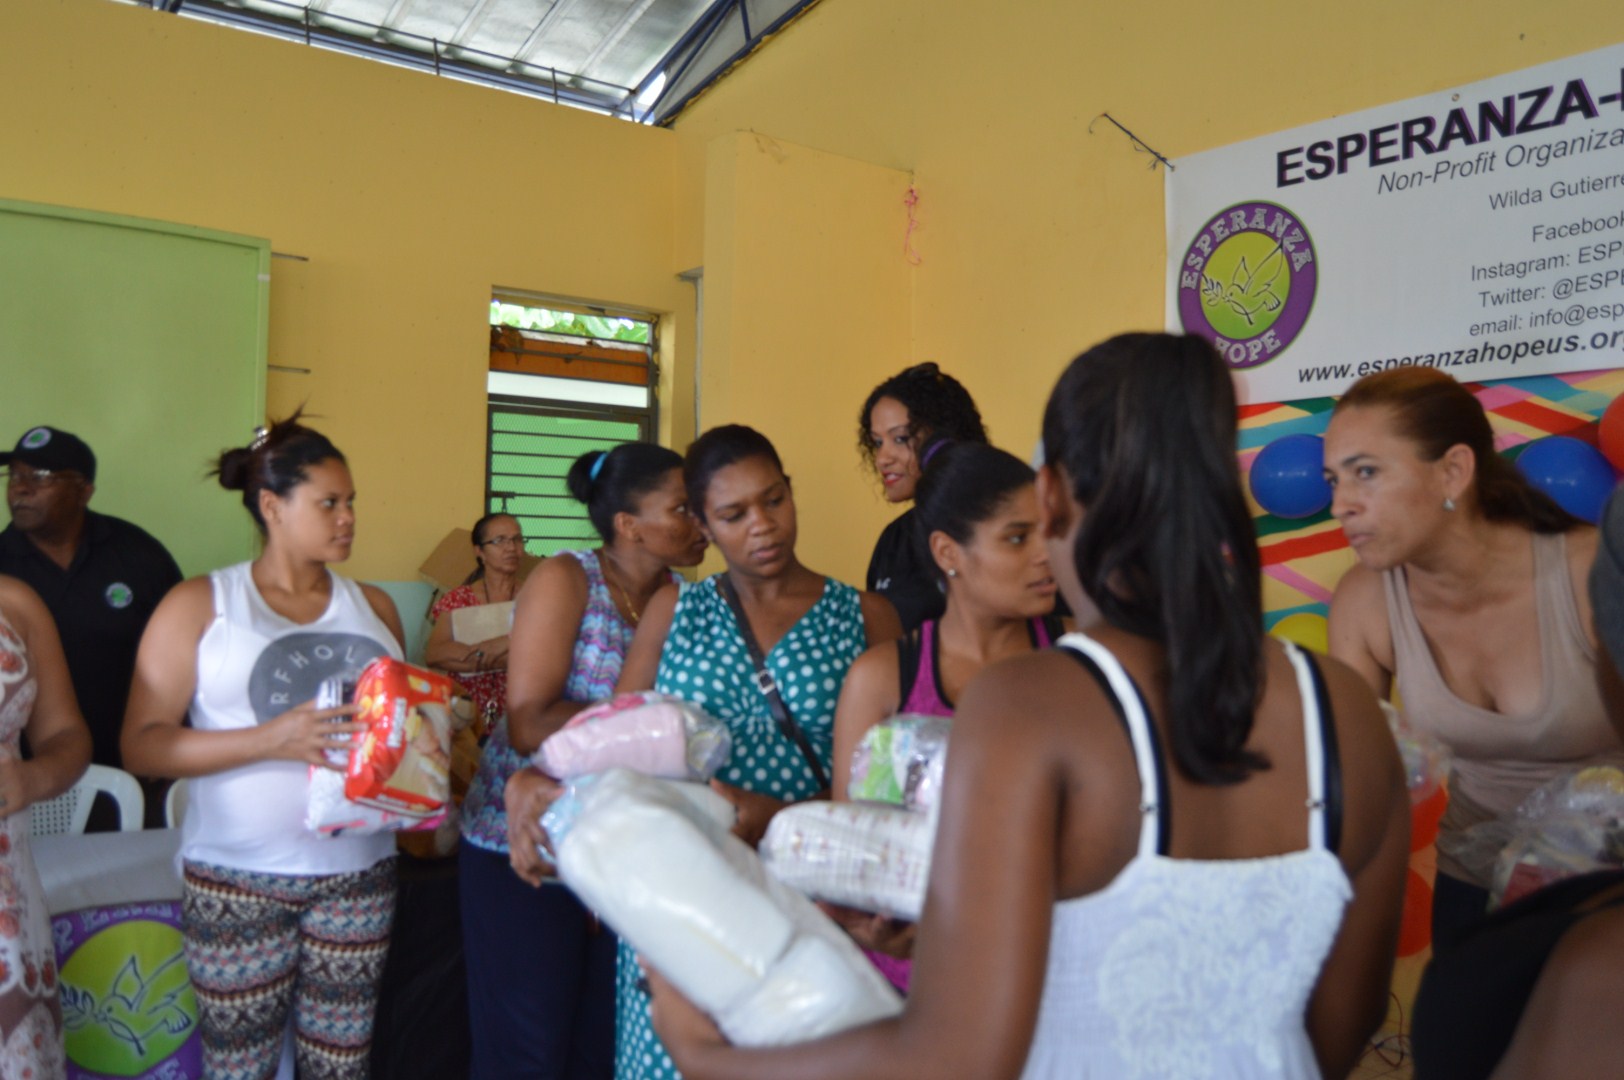 Mothers receiving packs of diapers and clothes, different angle